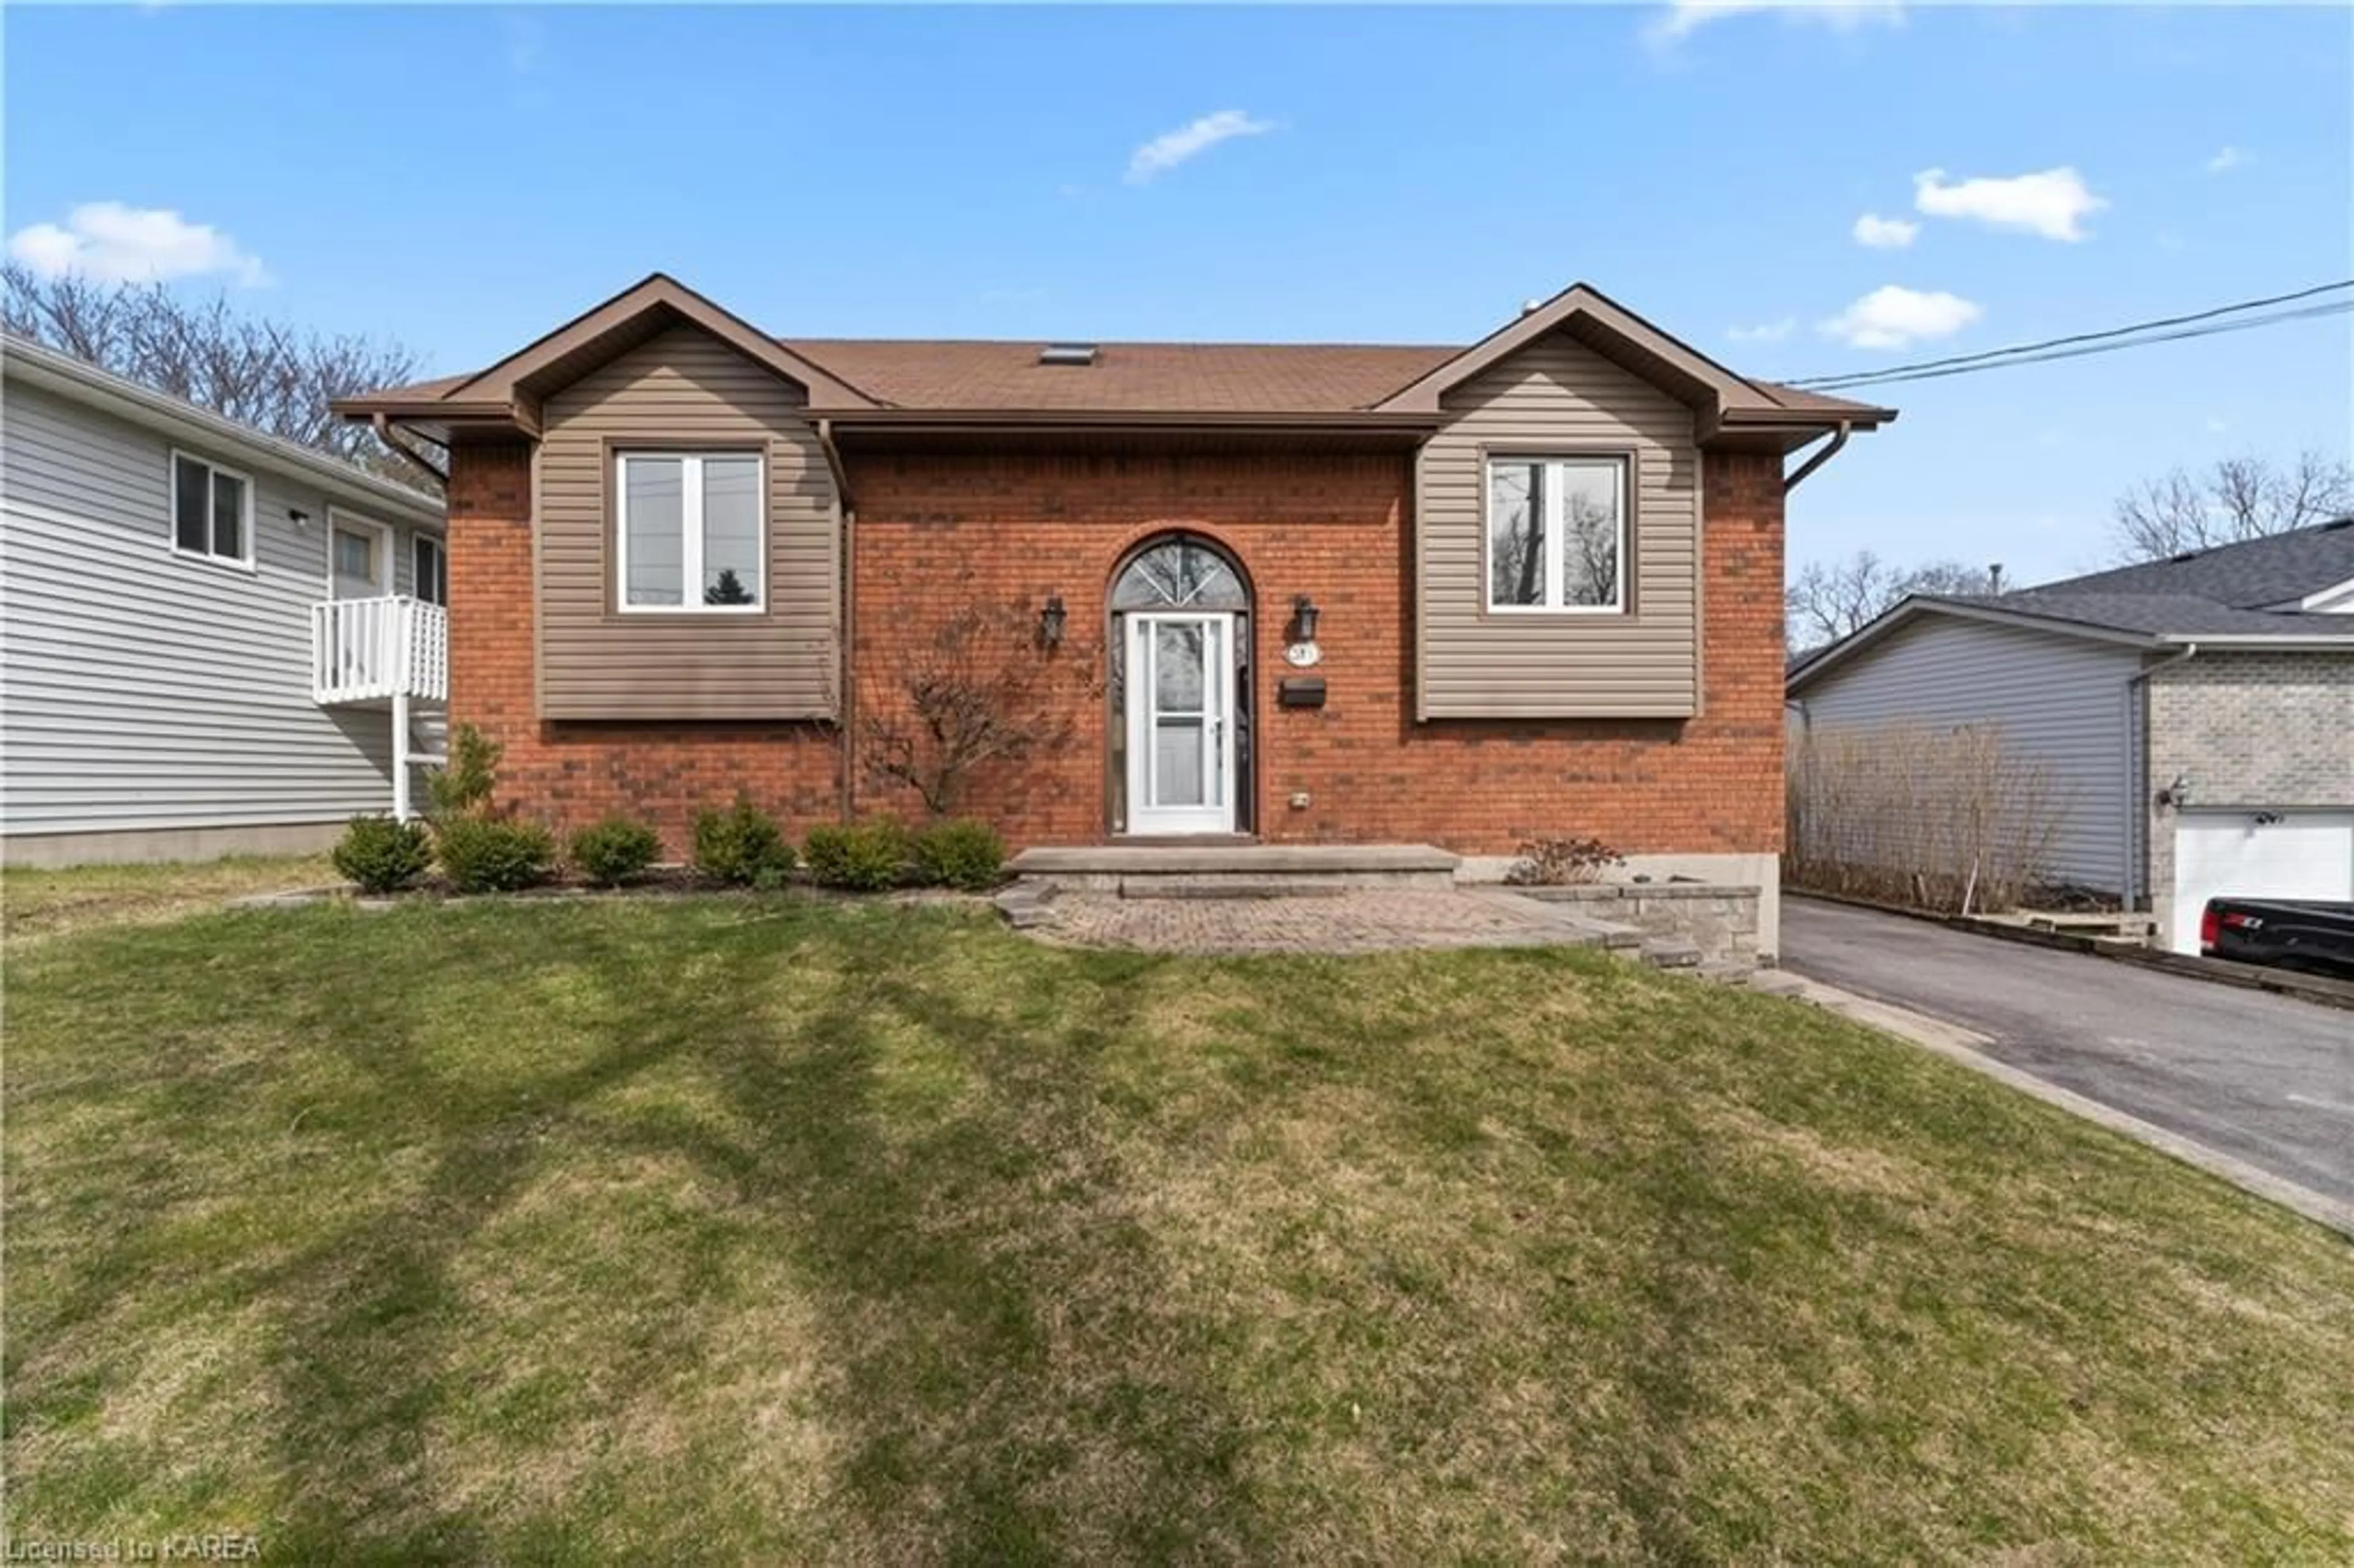 Home with brick exterior material for 315 Amherst Dr, Amherstview Ontario K7N 1V3